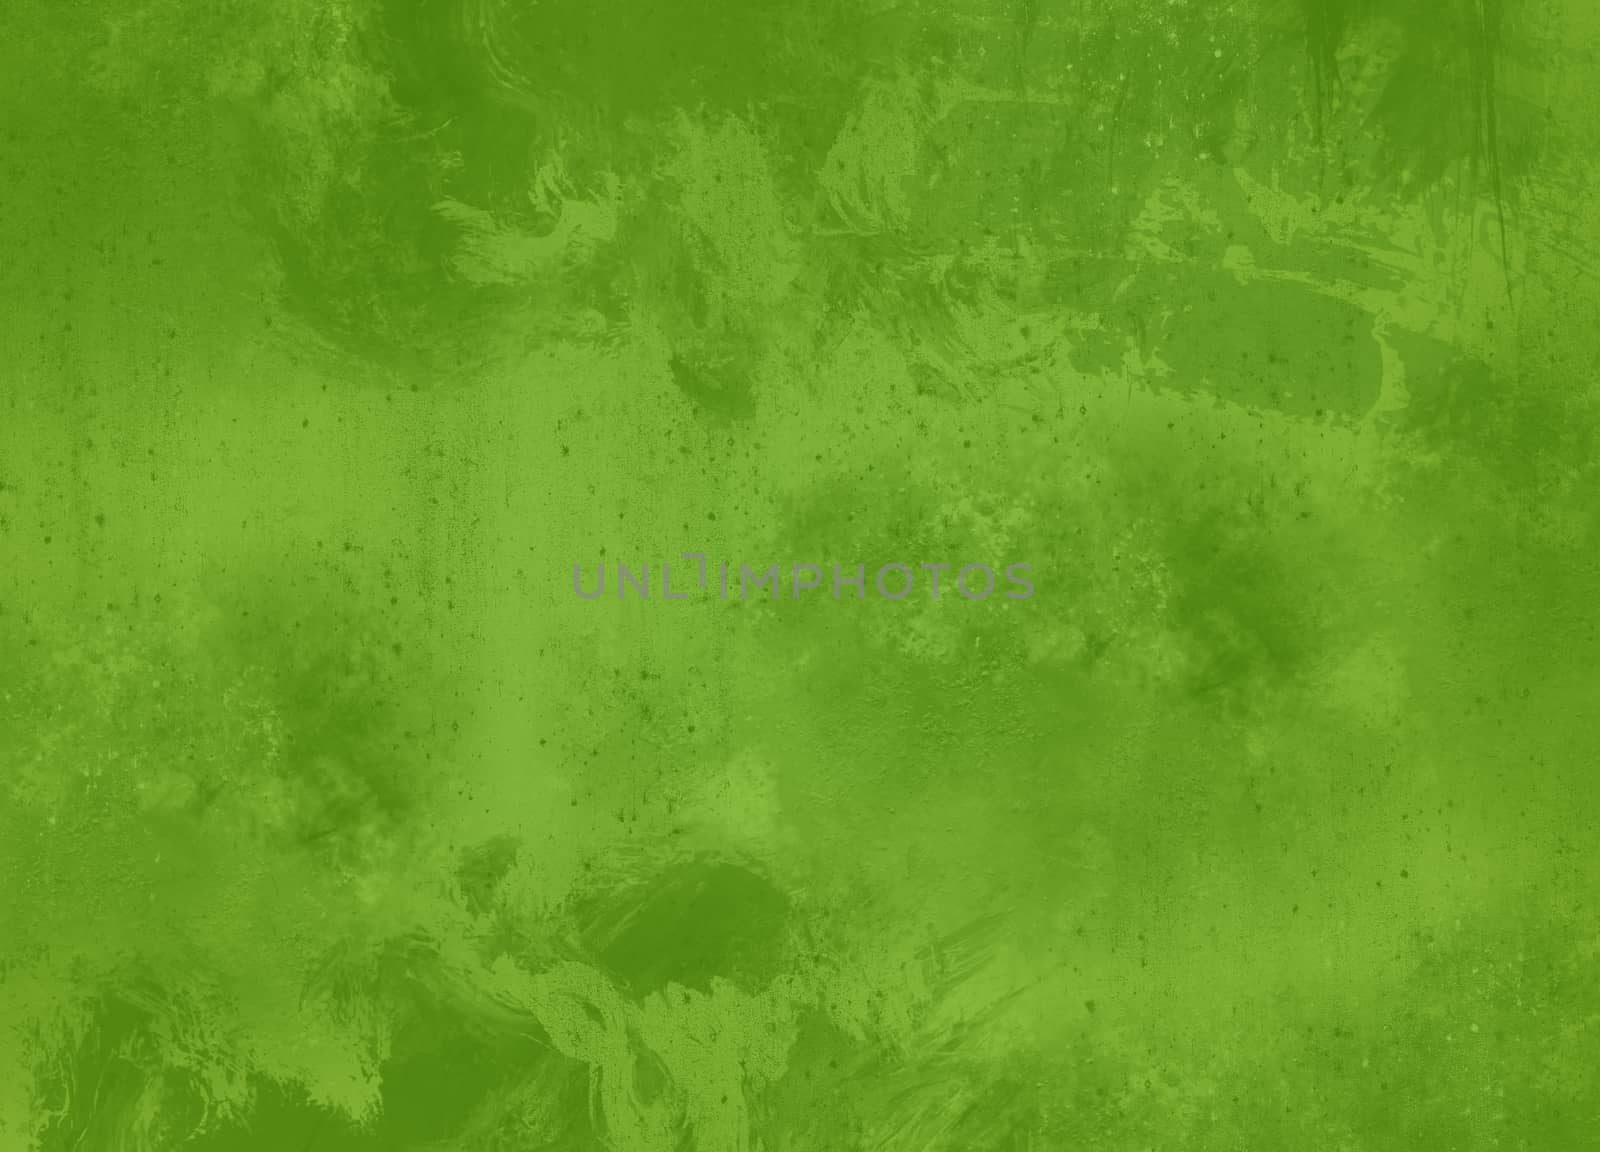 Rusty grunge background with texture and green colors by Sportactive